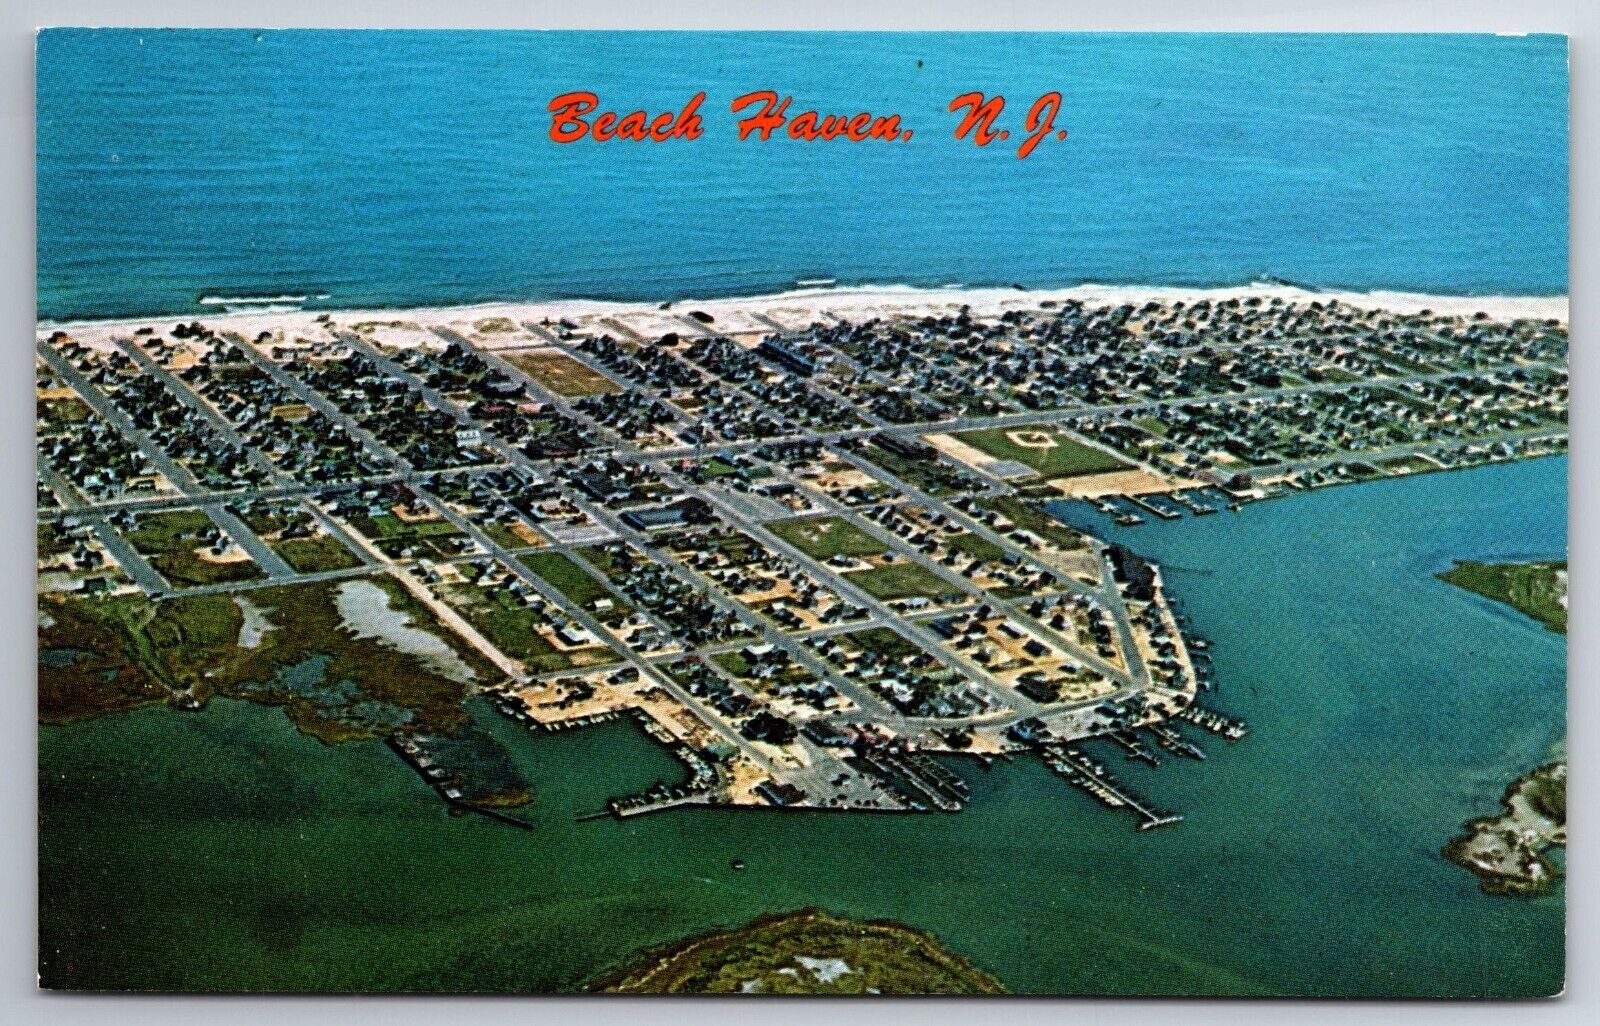 Beach Haven NJ - BIRDSEYE VIEW OF HOTEL & COTTAGES - Postcard Unposted